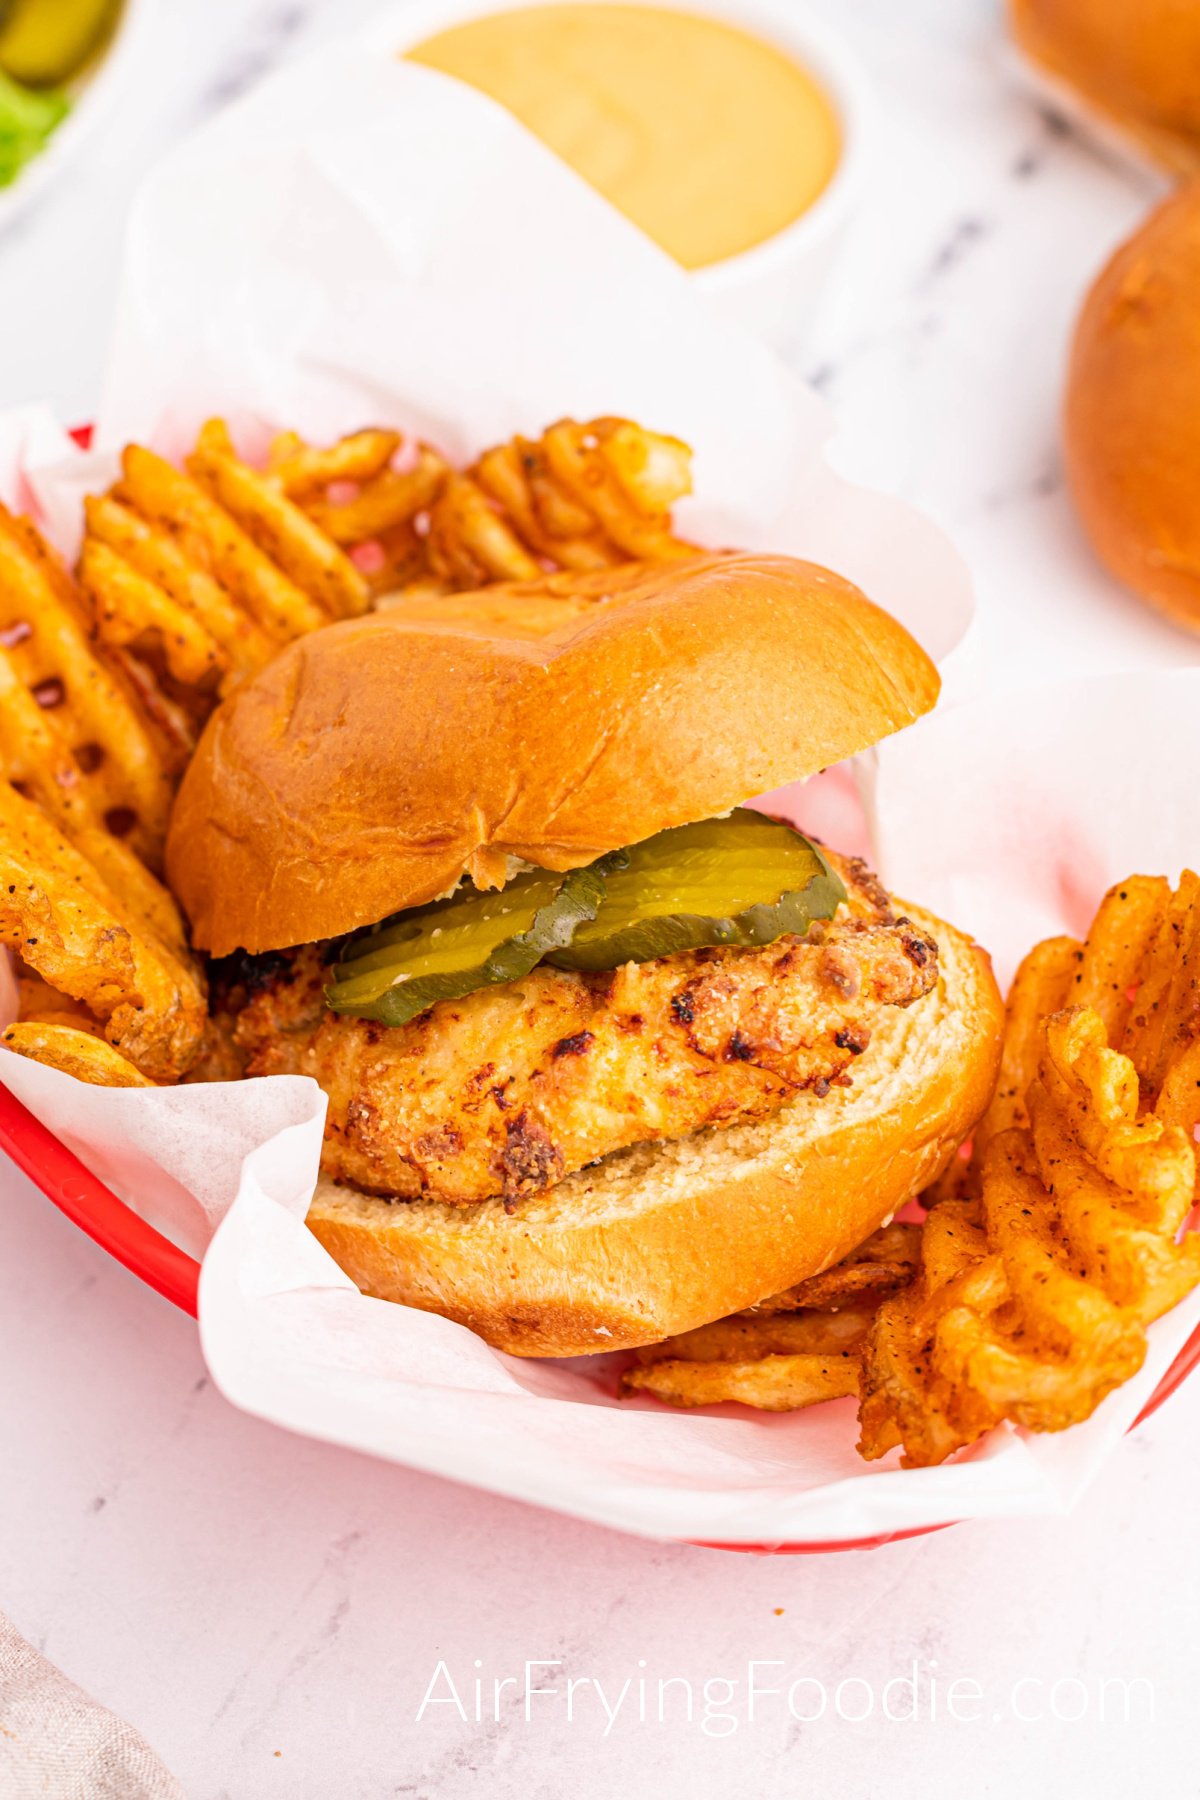 Chicken sandwich fully cooked from the air fryer served with waffle fries in a red basket. There is a white bowl of sauce above the basket and a small portion of extra buns in the image's top right.